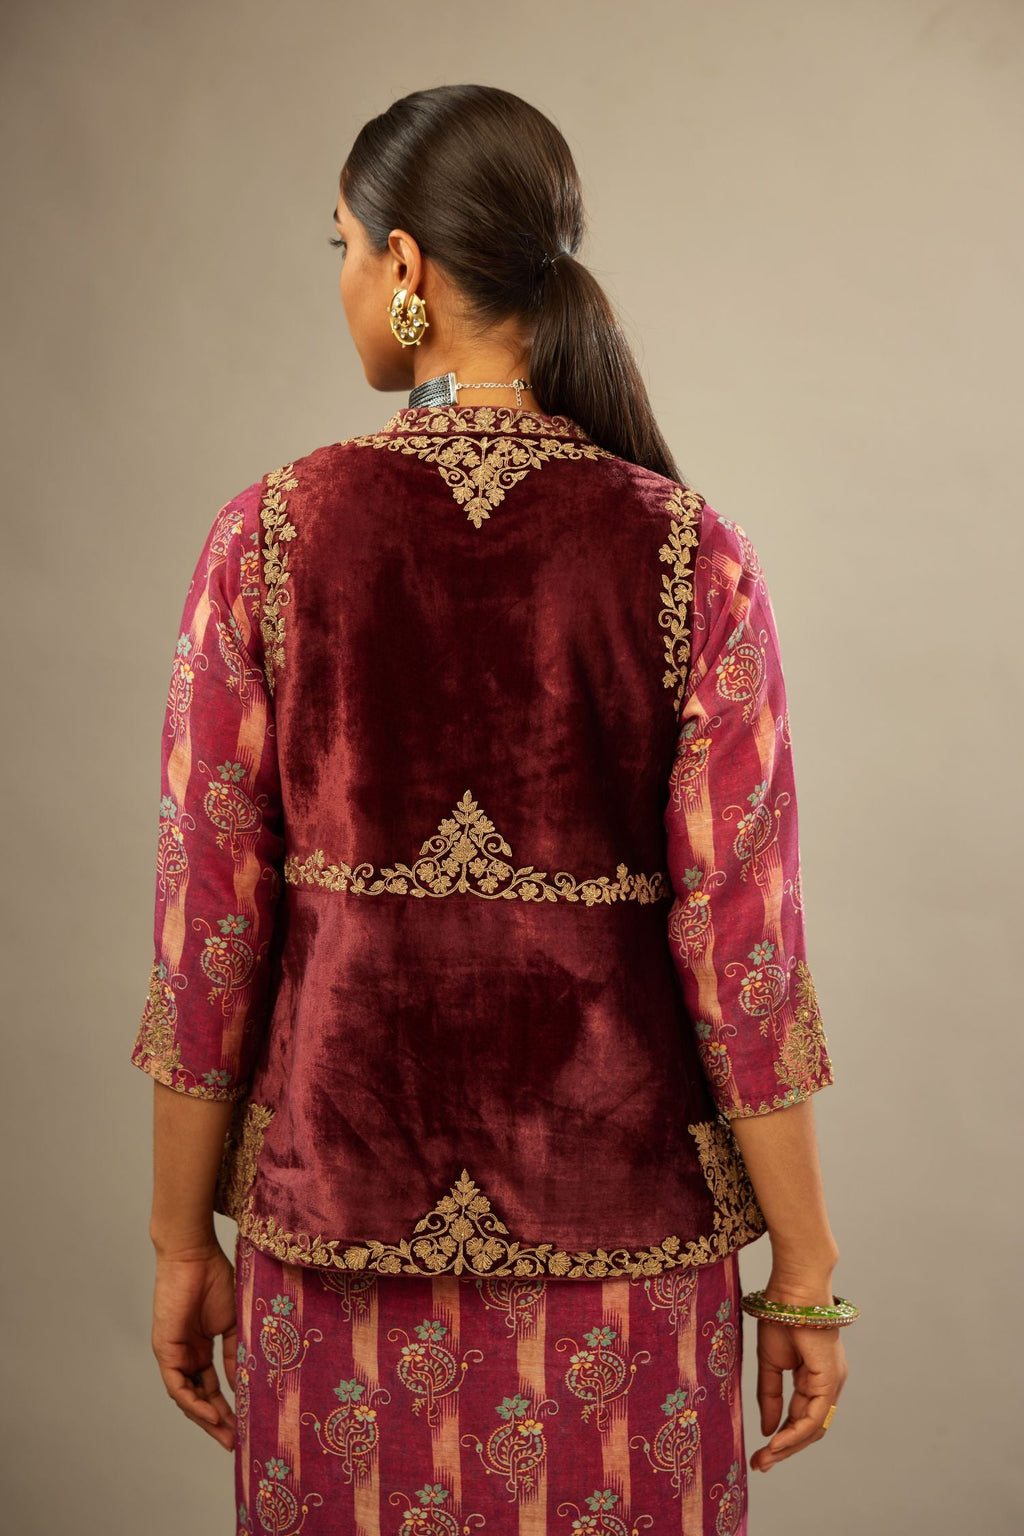 Maroon easy fit, short, sleeveless, silk-velvet jacket, embellished with antique gold embroidery.